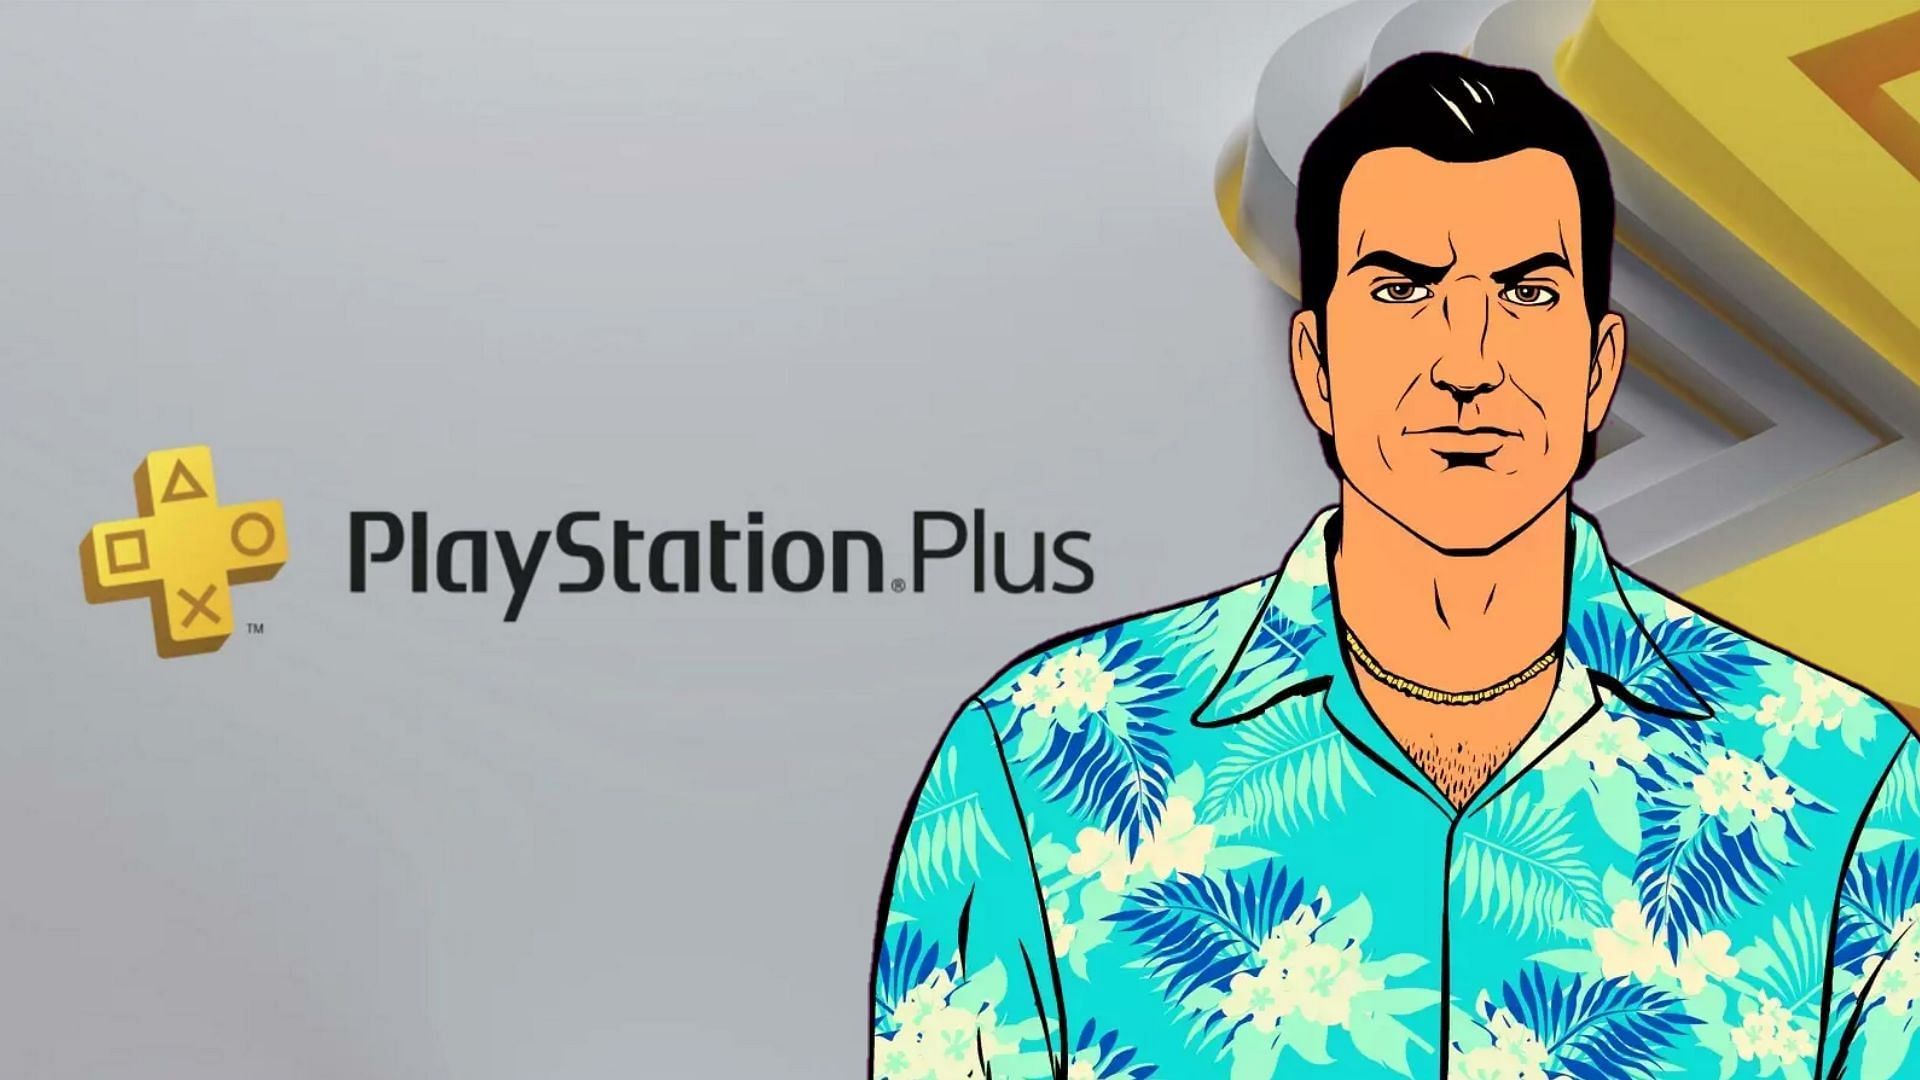 Free PS Plus games! Check list, including GTA Vice City